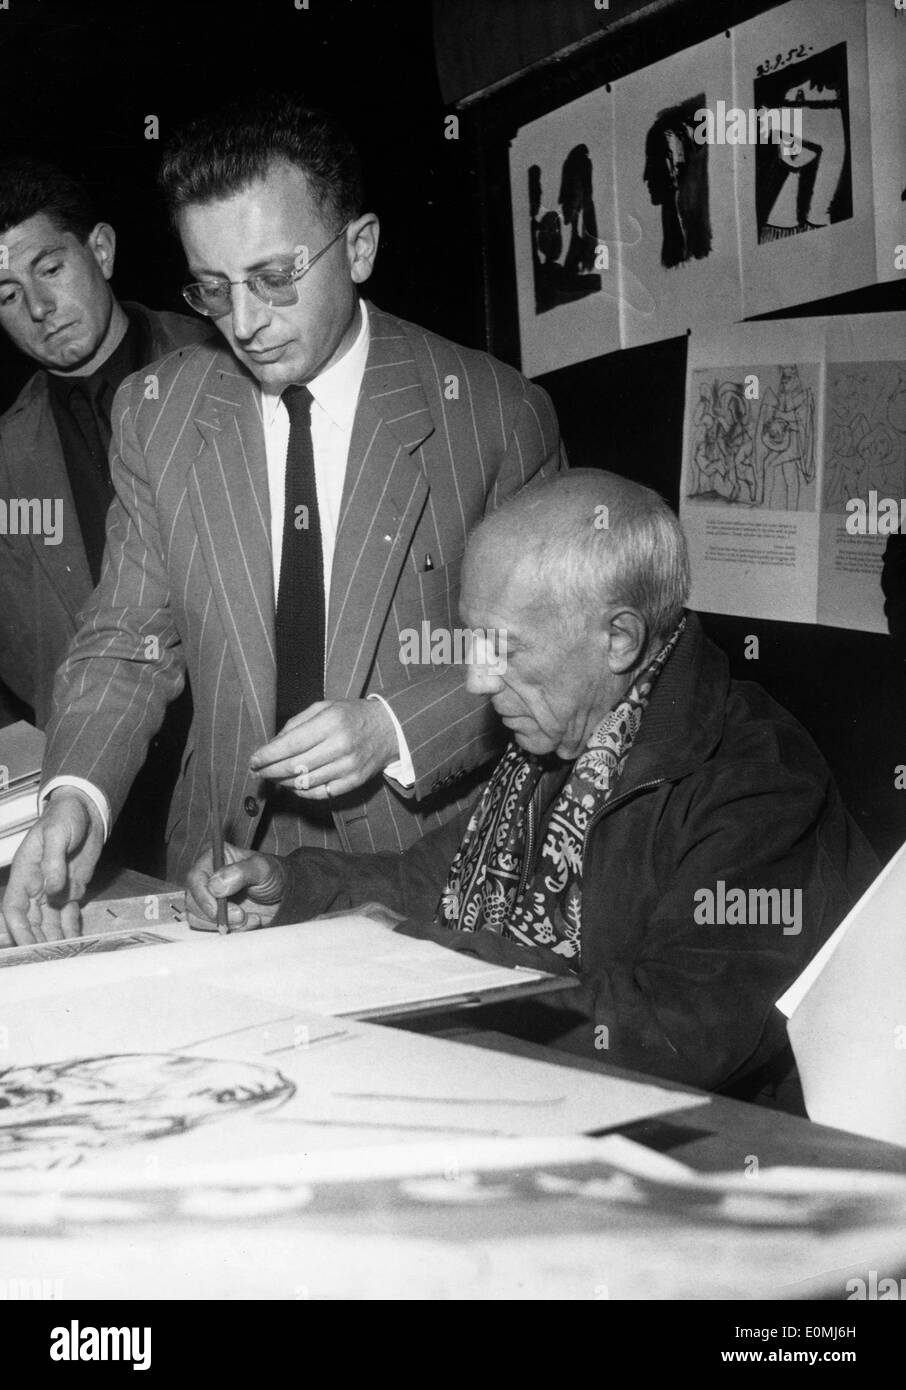 Artist Pablo Picasso drawing Stock Photo